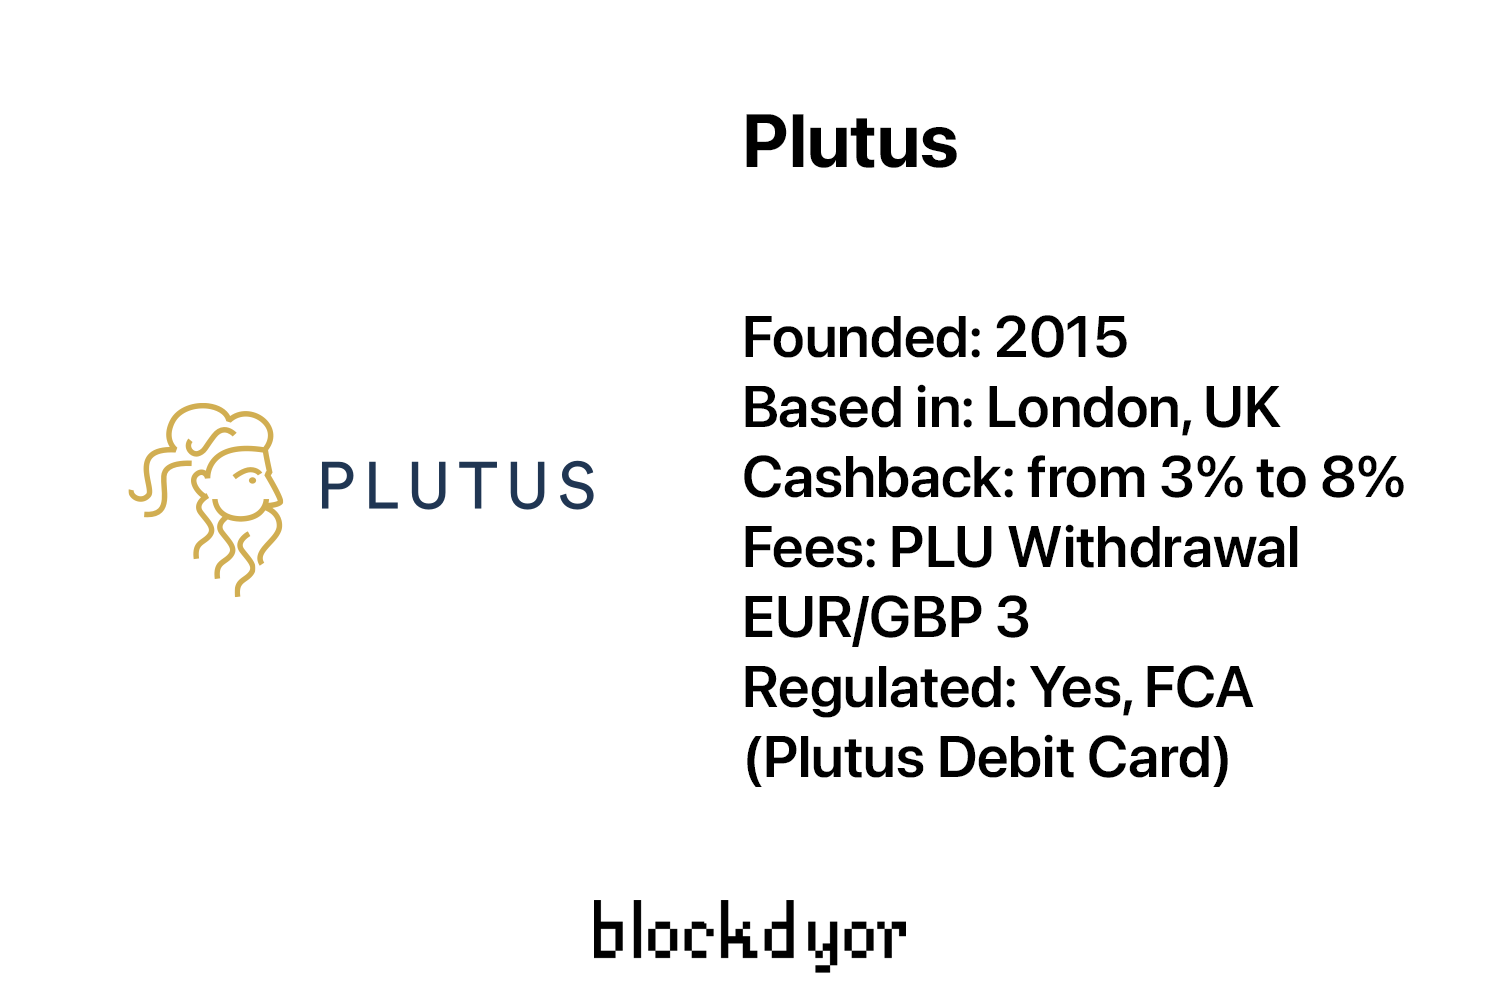 Plutus Overview